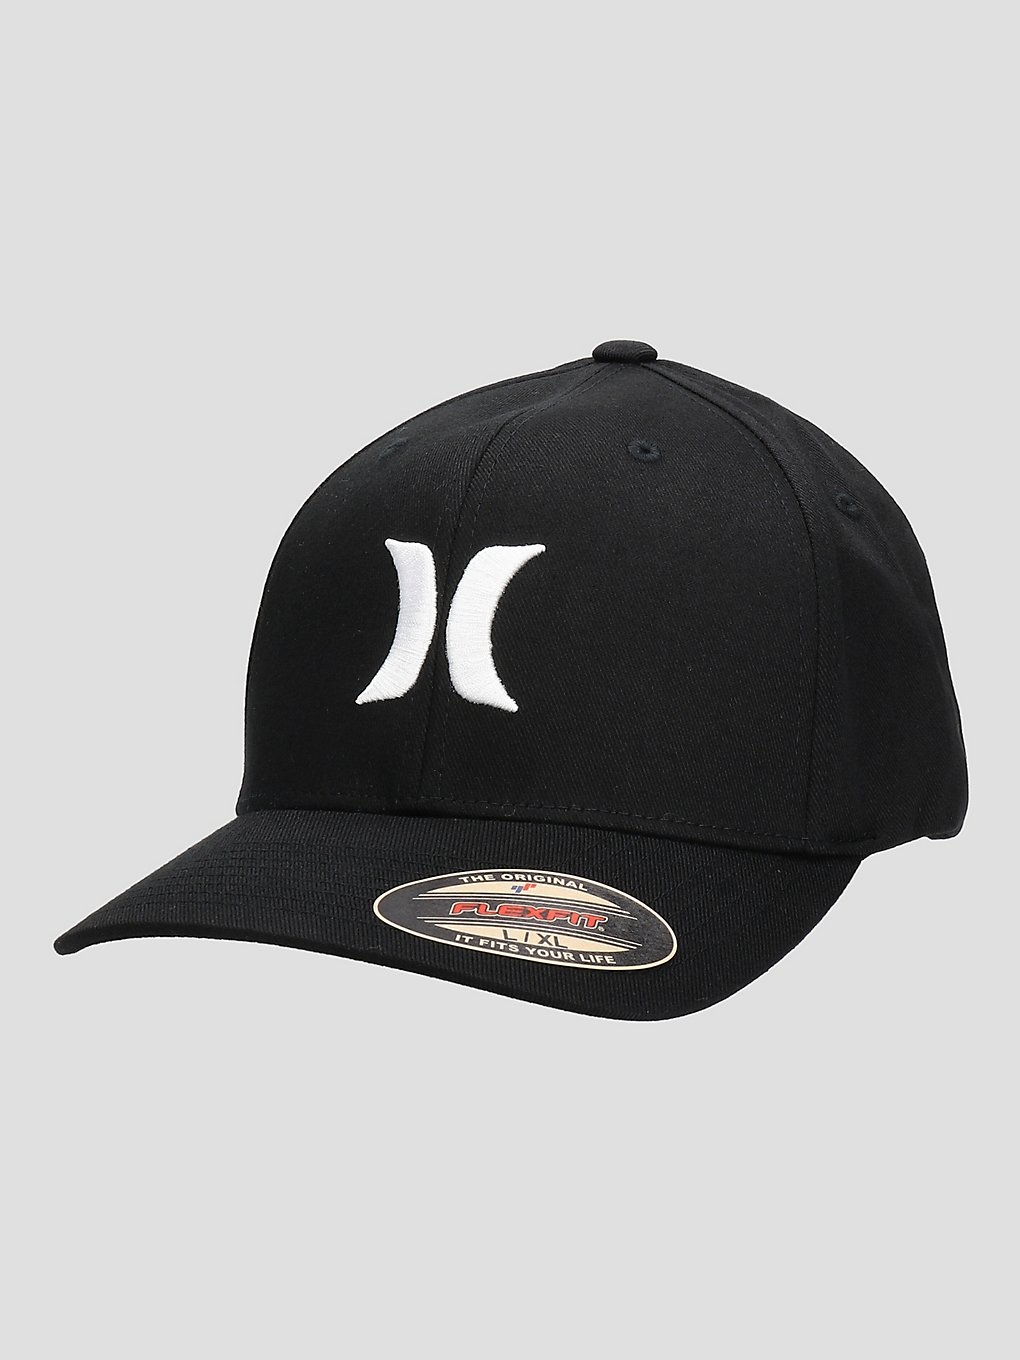 Hurley One & Only Cap black kaufen